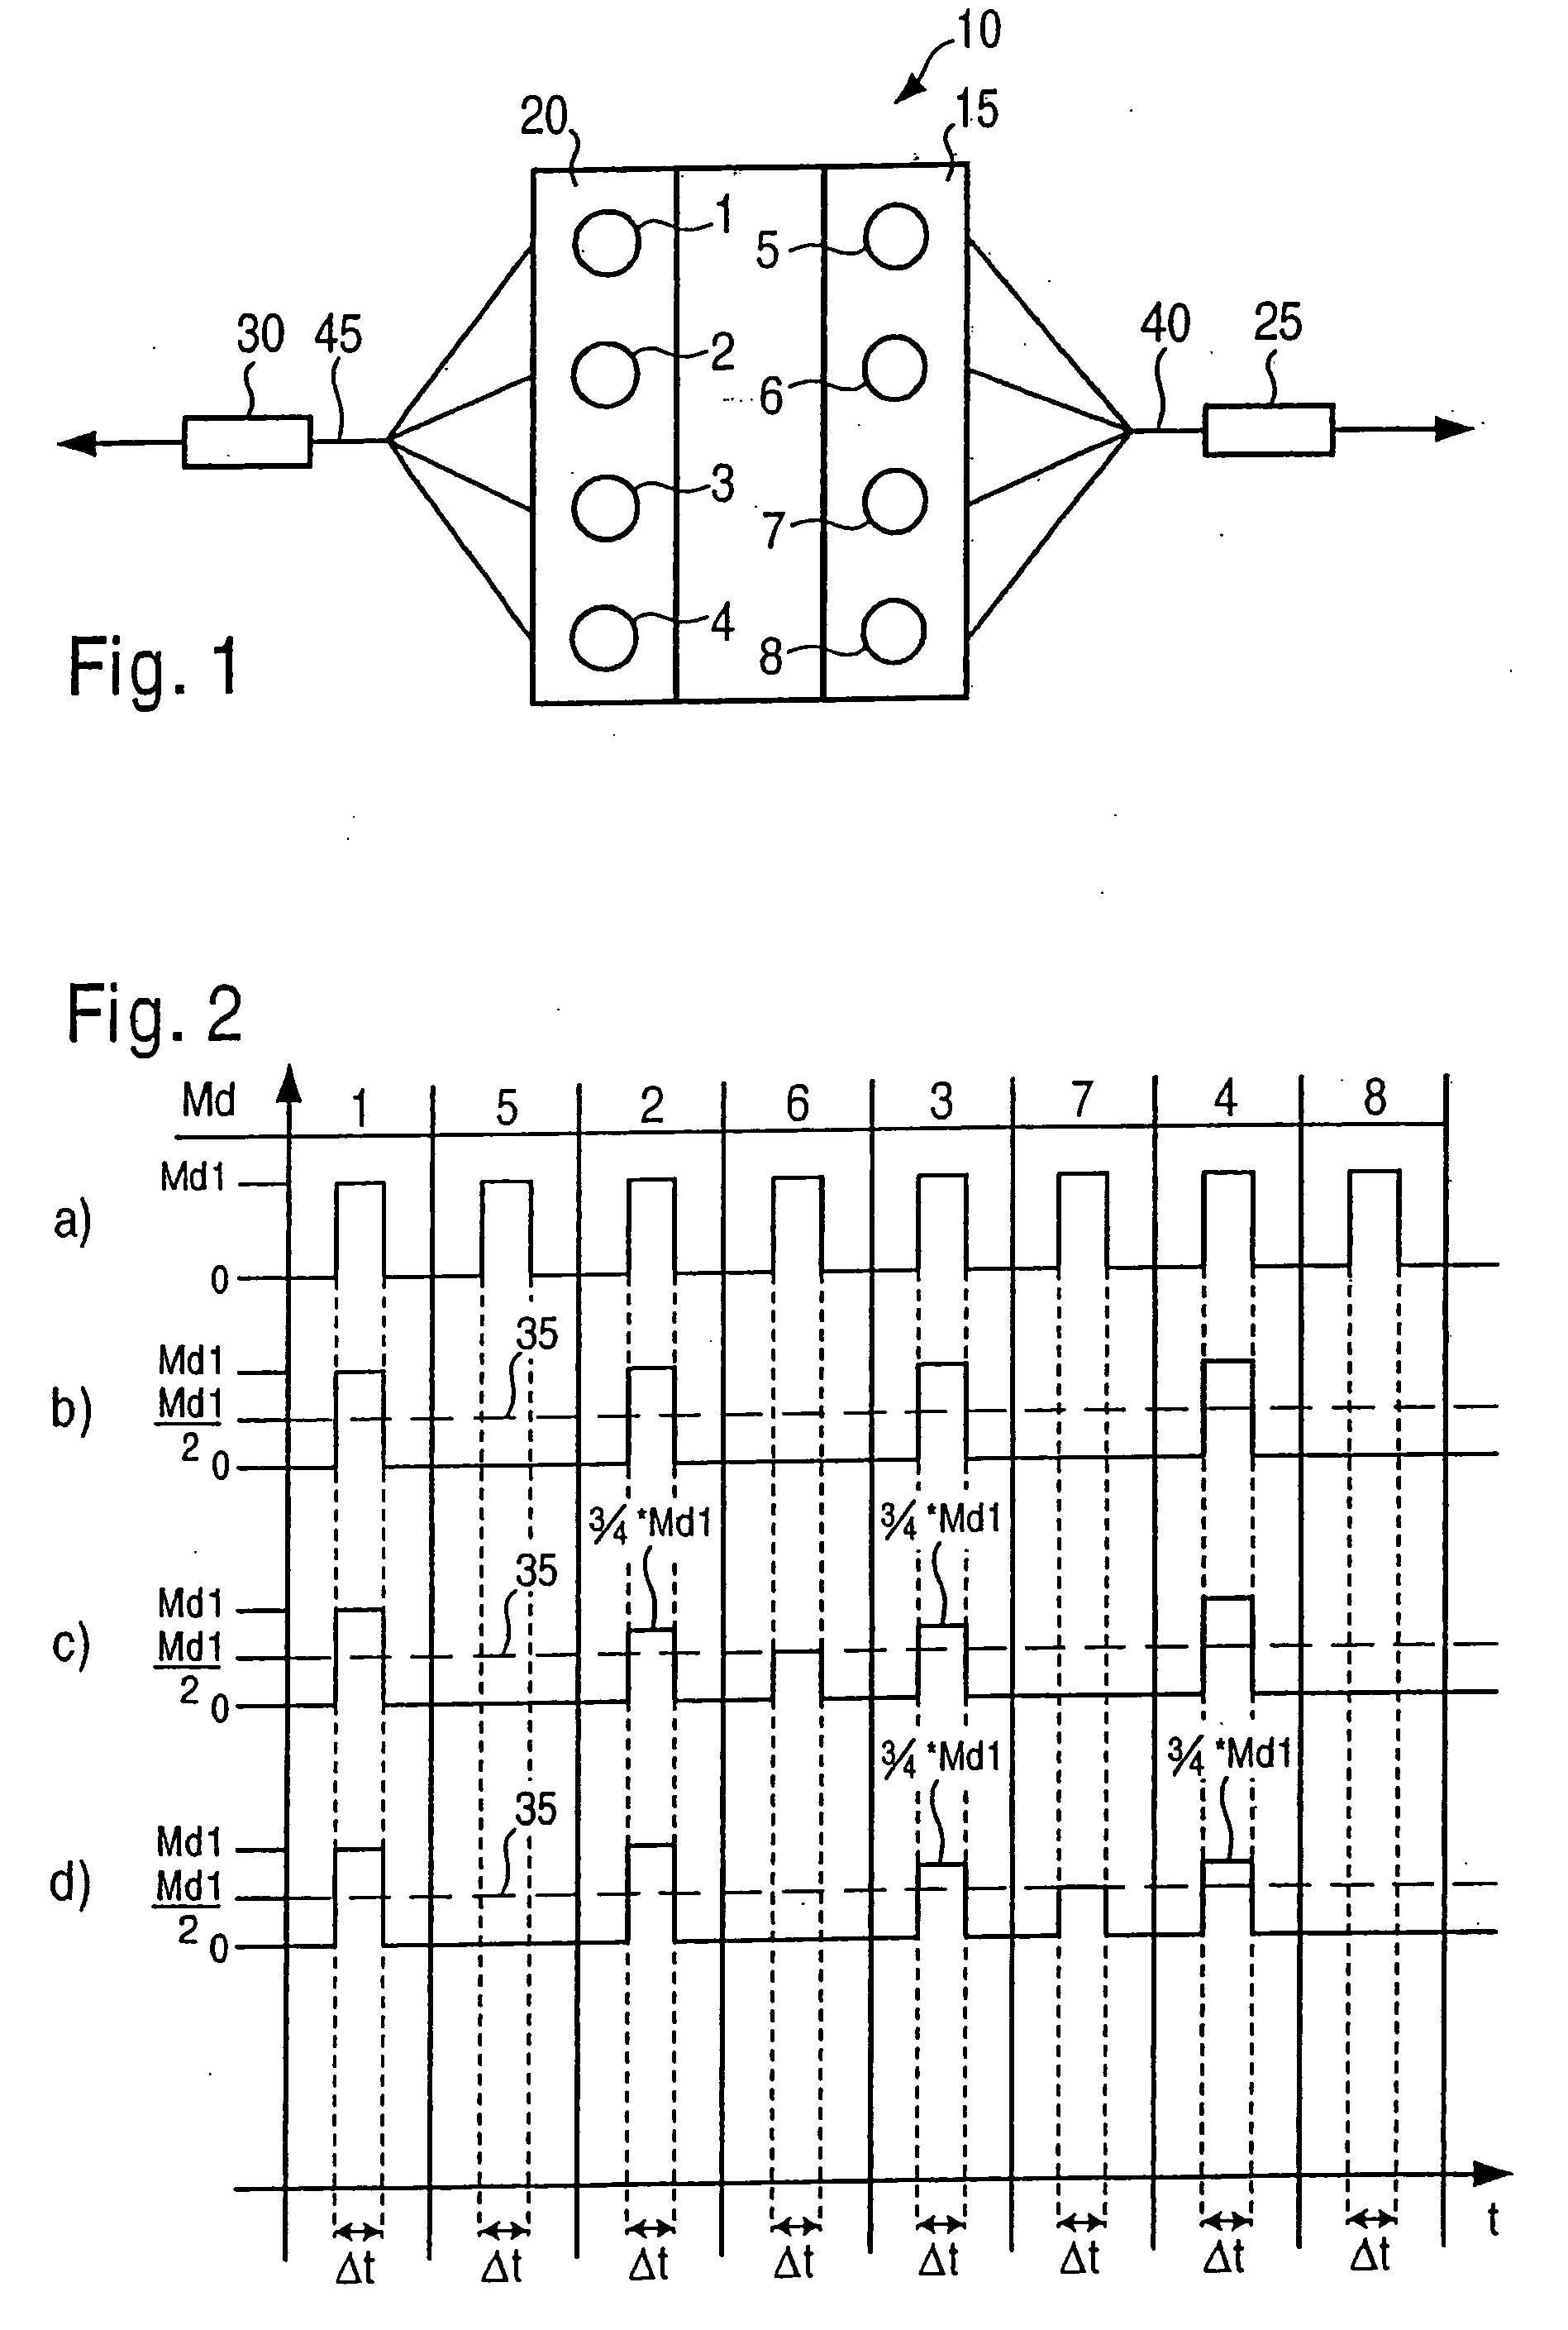 Method for Operating an Internal Combustion Engine having a plurality of cylinder banks